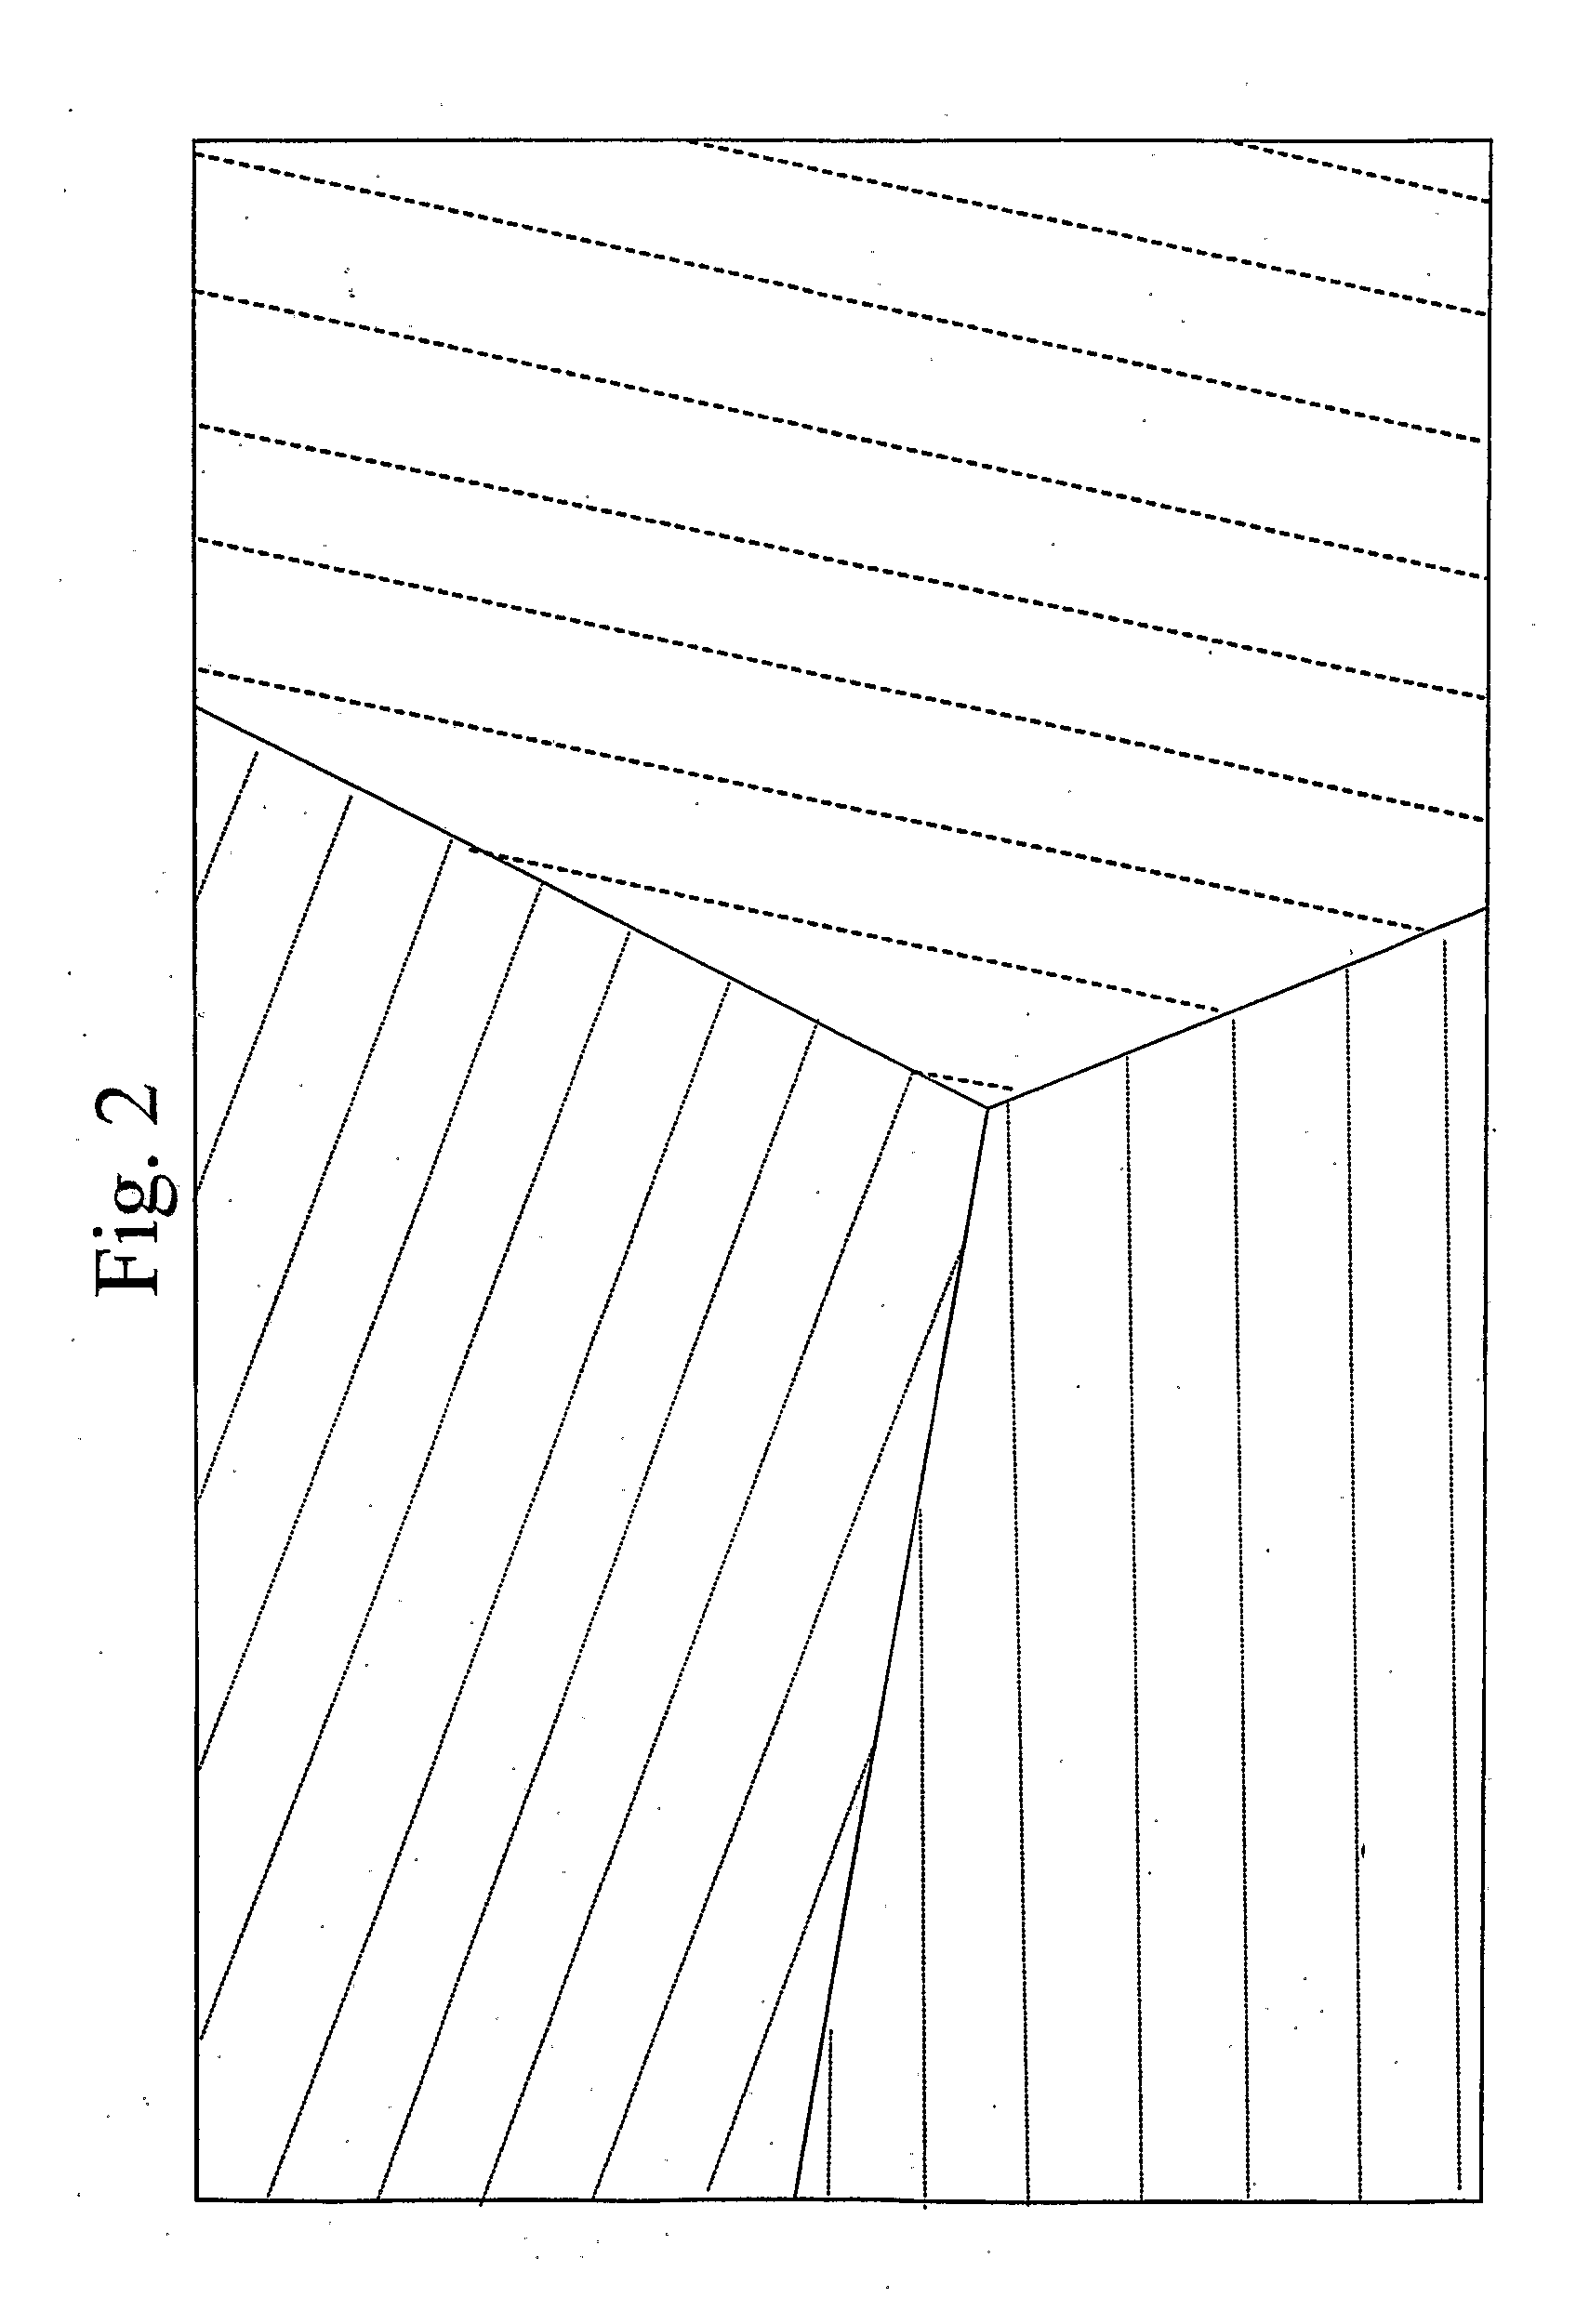 Method for Fabricating a Long-Range Ordered Periodic Array of Nano-Features, and Articles Comprising Same